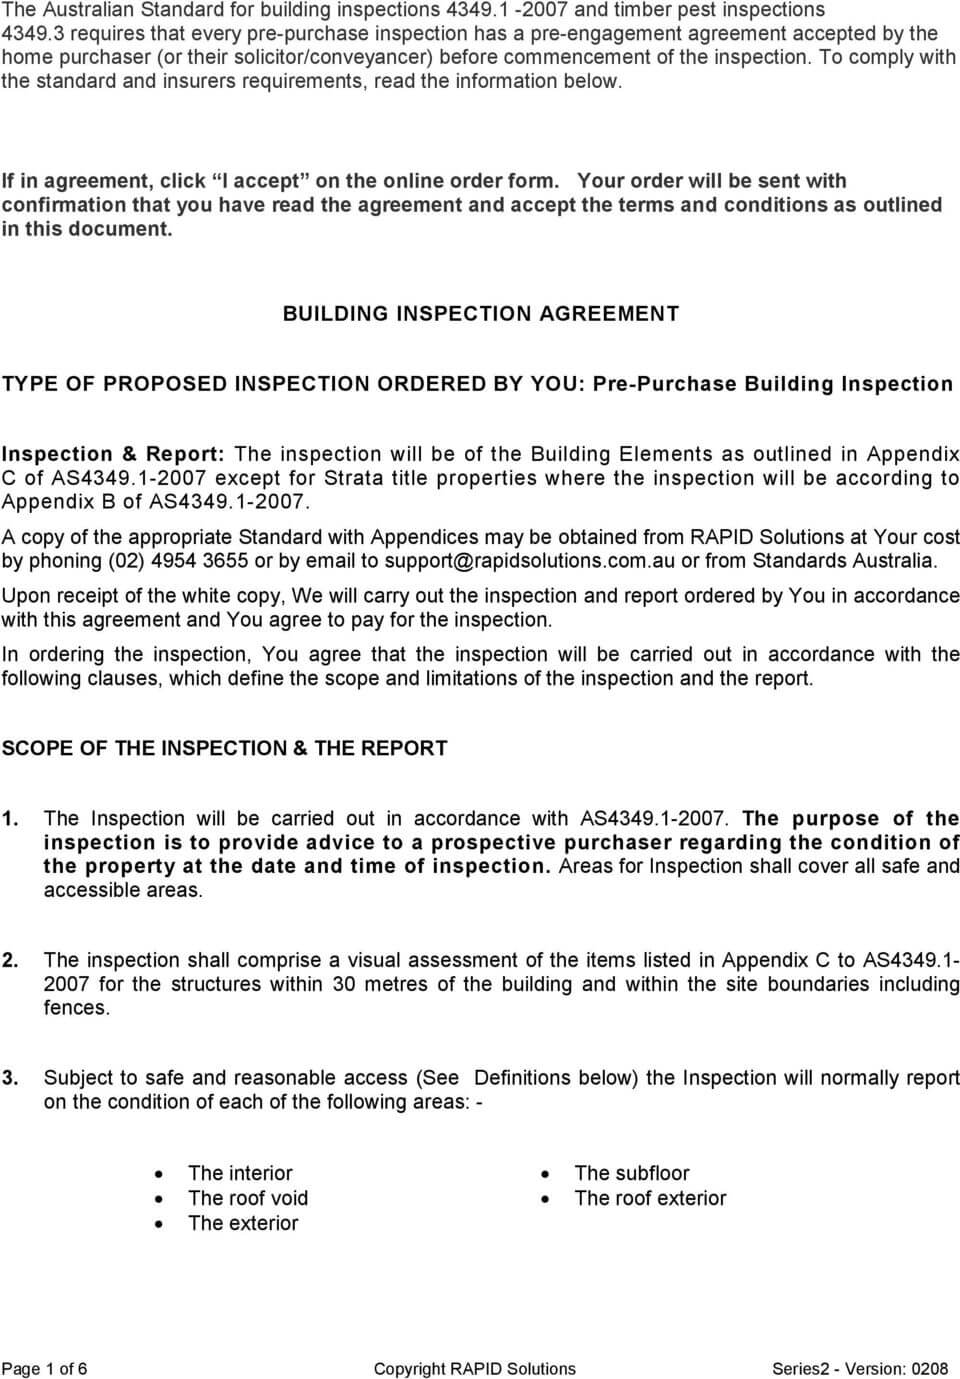 Building Inspection Agreement. Type Of Proposed Inspection Throughout Pre Purchase Building Inspection Report Template